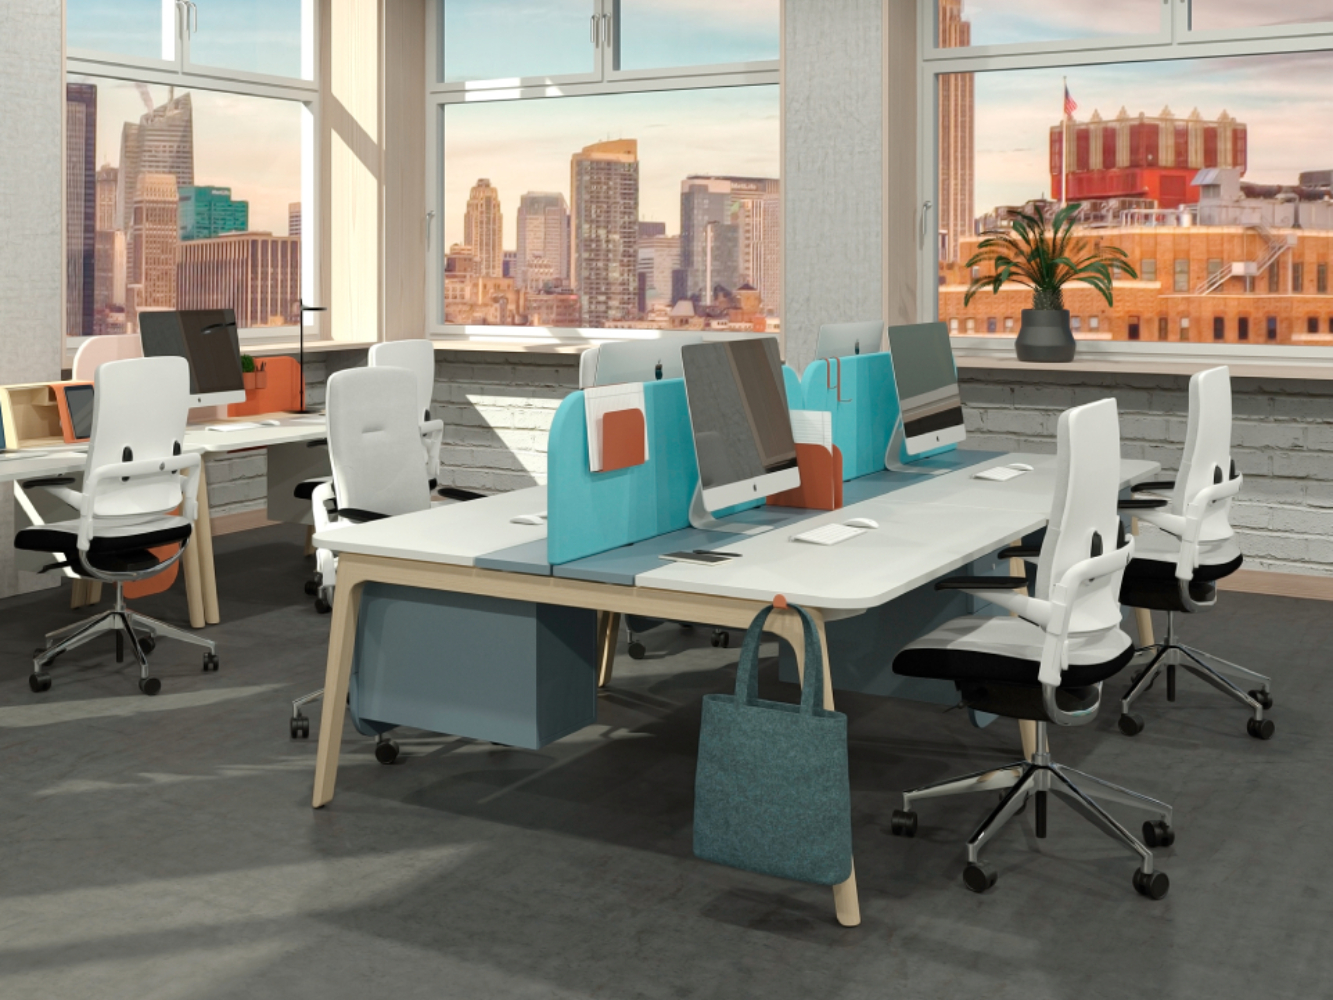 Smart Office: Make your workplace awesome